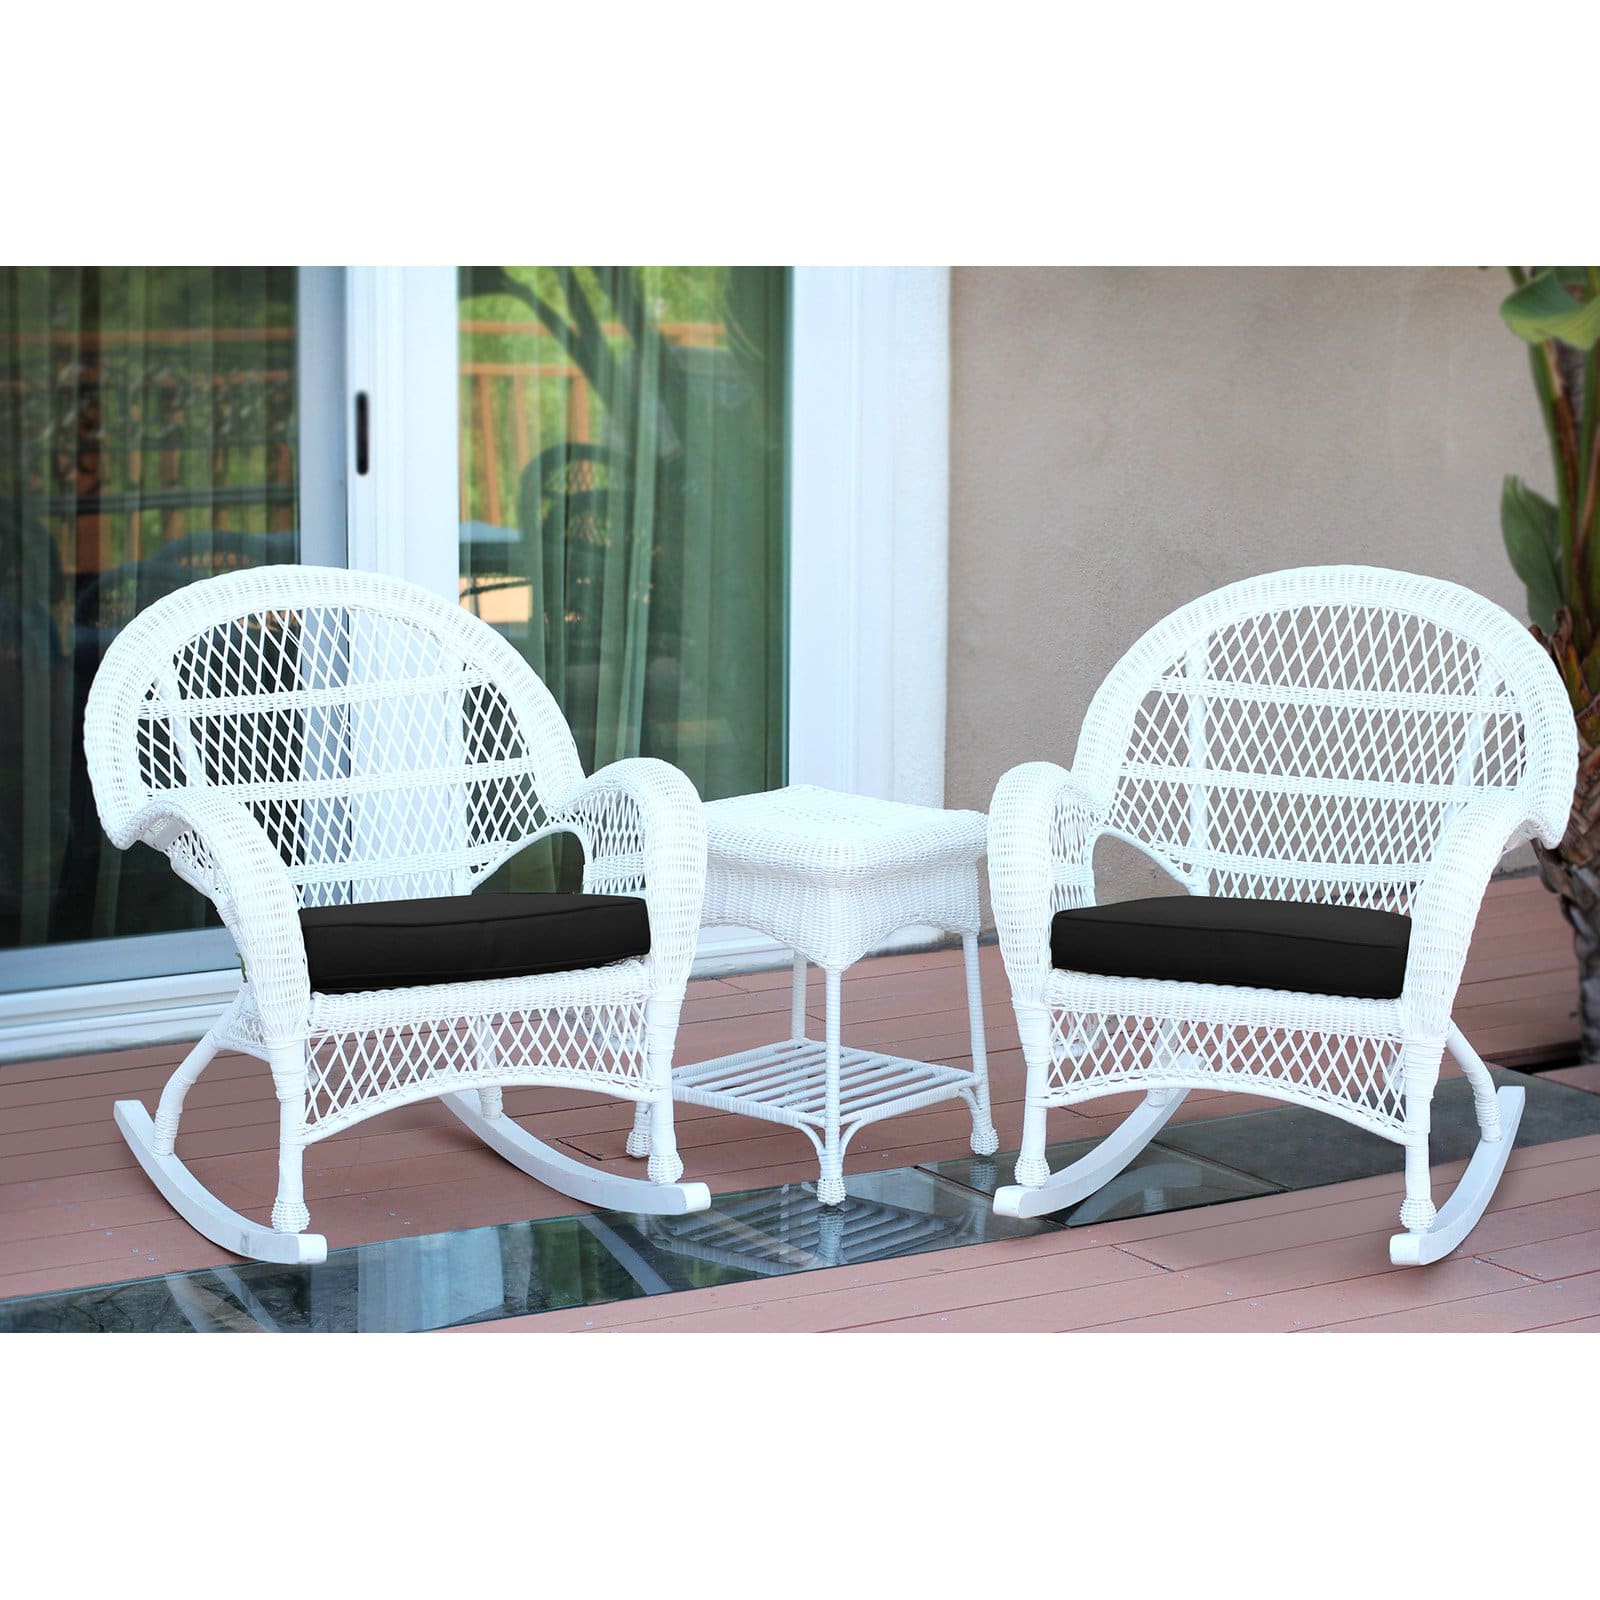 Jeco 3 Piece Wicker Conversation Set in White with Tan Cushions - image 3 of 11